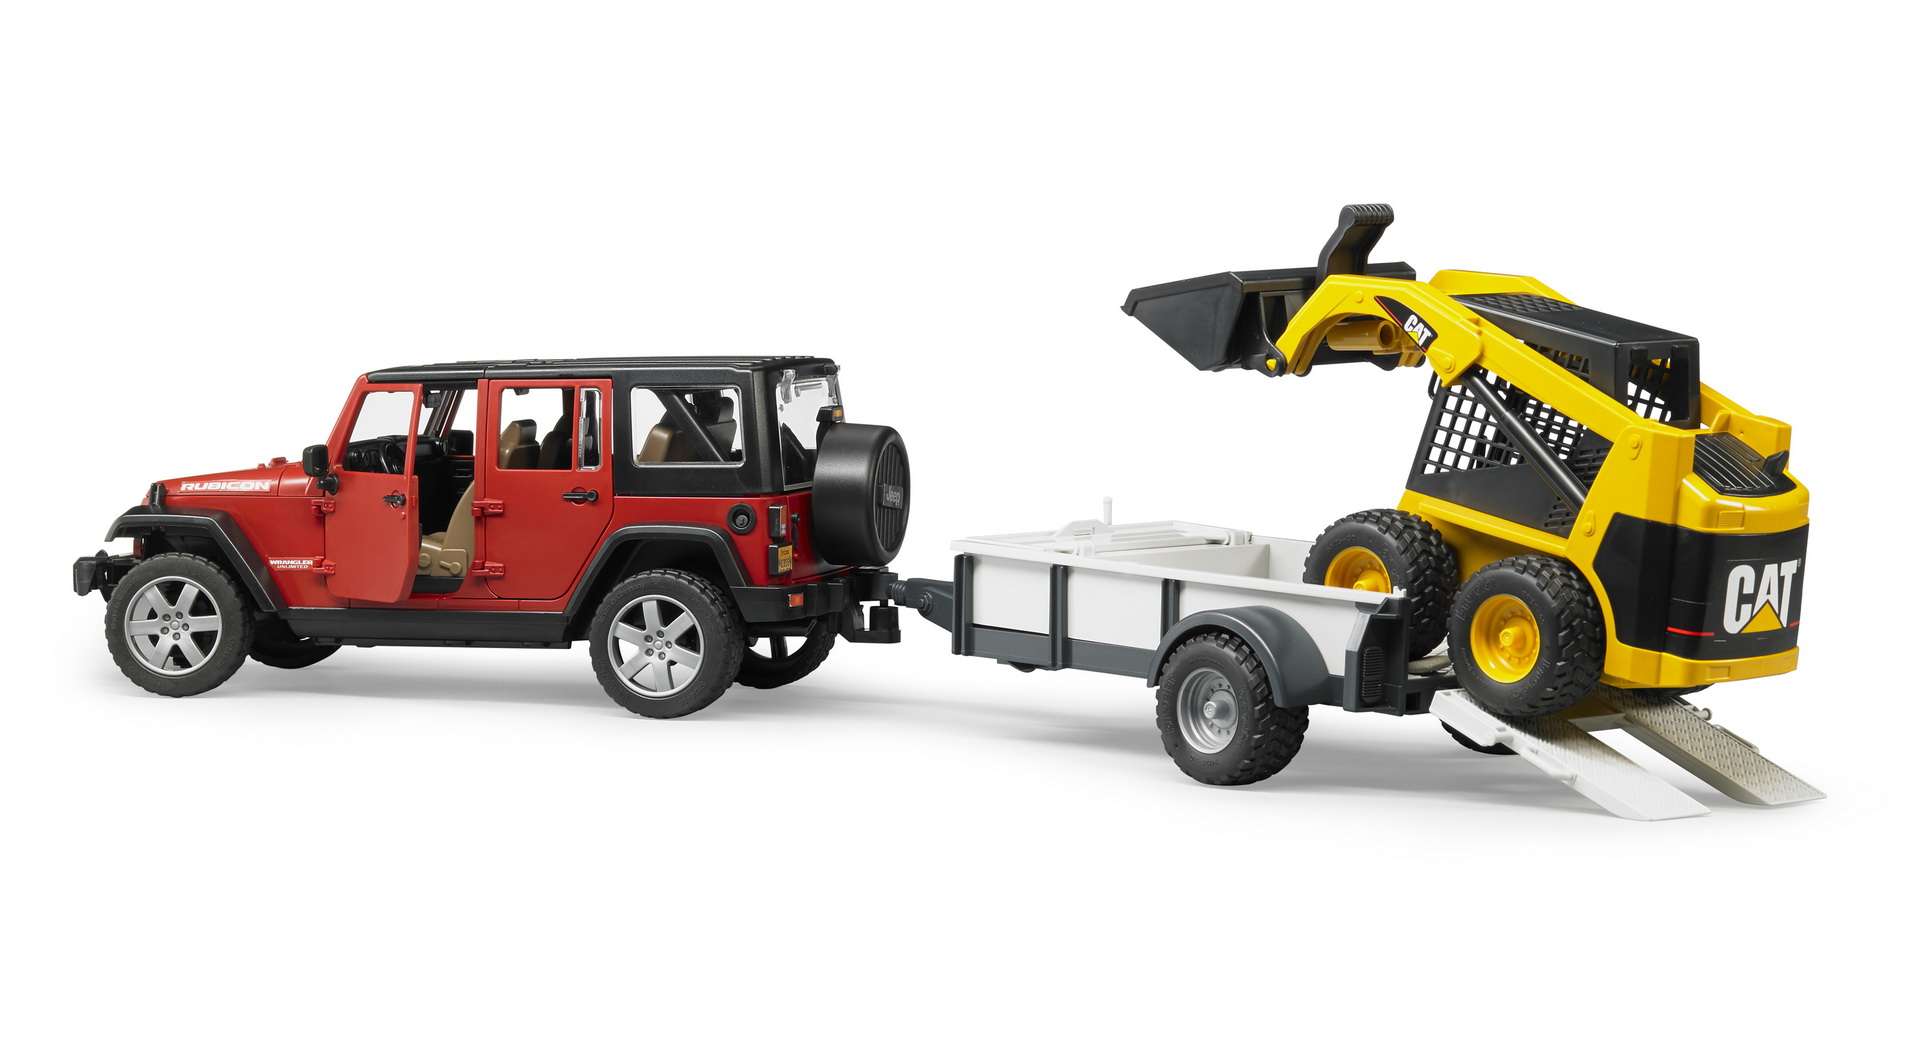 Bruder - Jeep Wrangler Rubicon with Trailer & Cat Vehicle (2925)